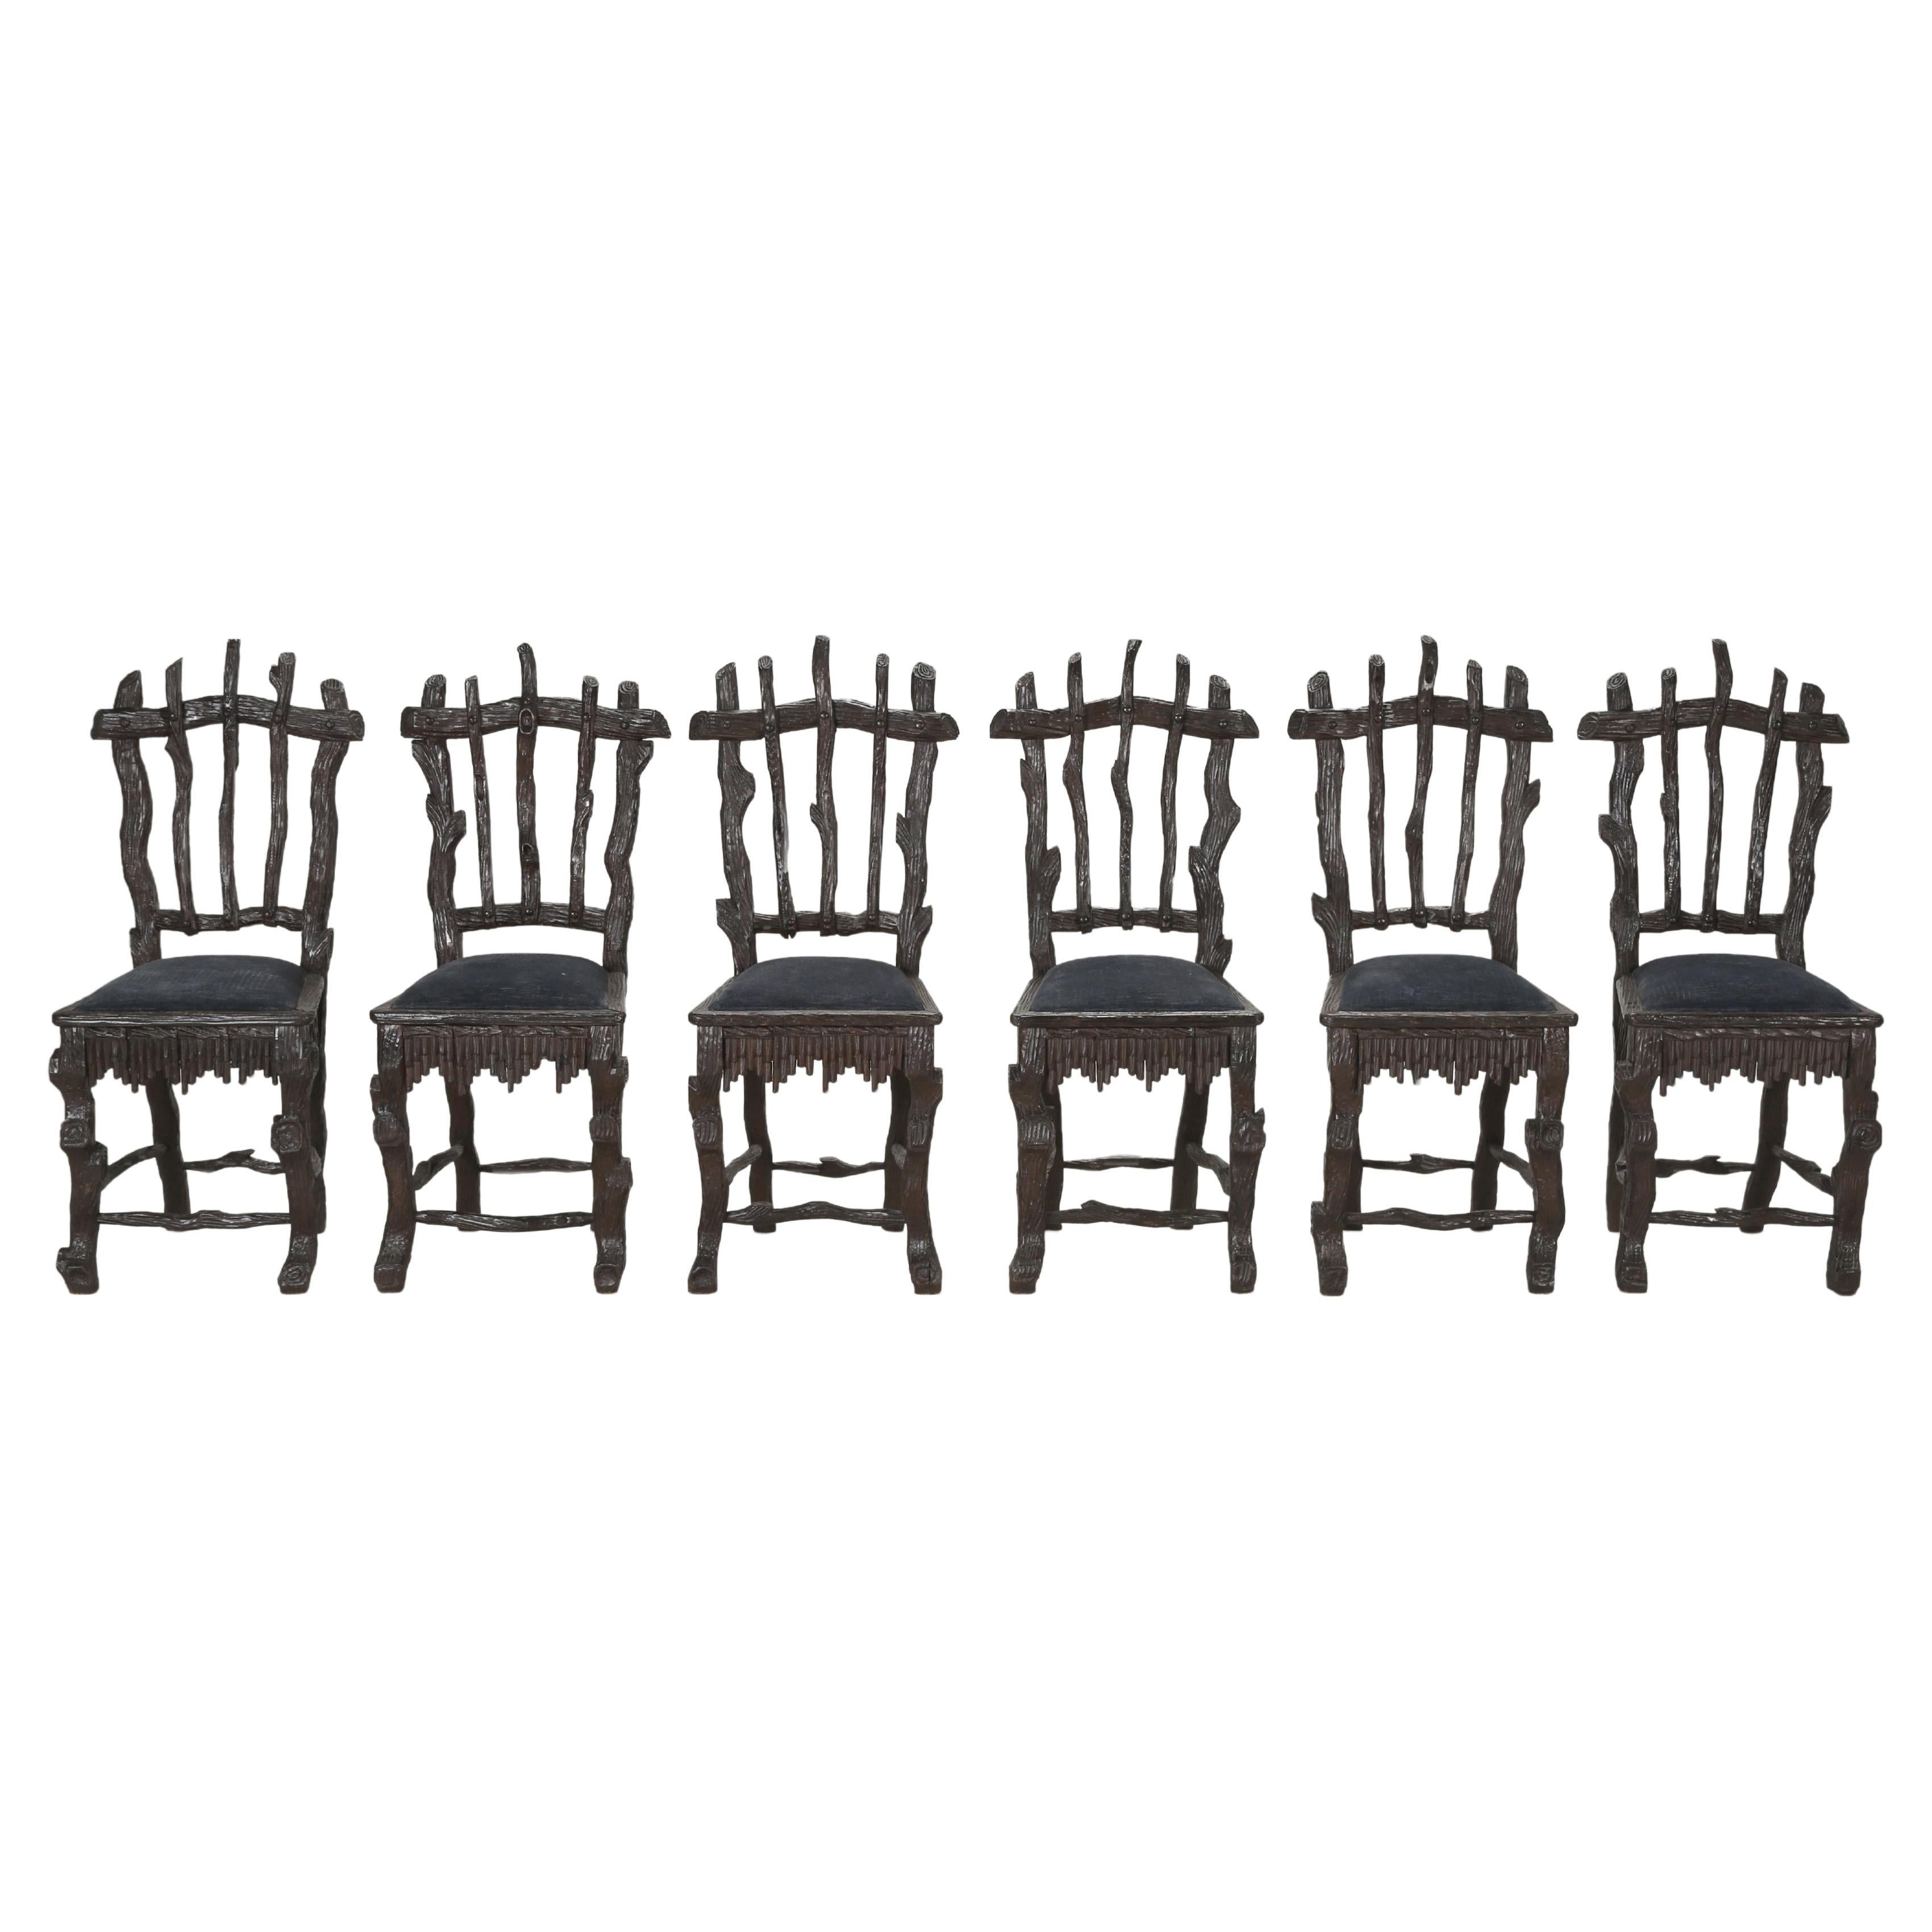 Original Black Forest Set '6' Hand-Carved Dining Chairs Available Matching Table